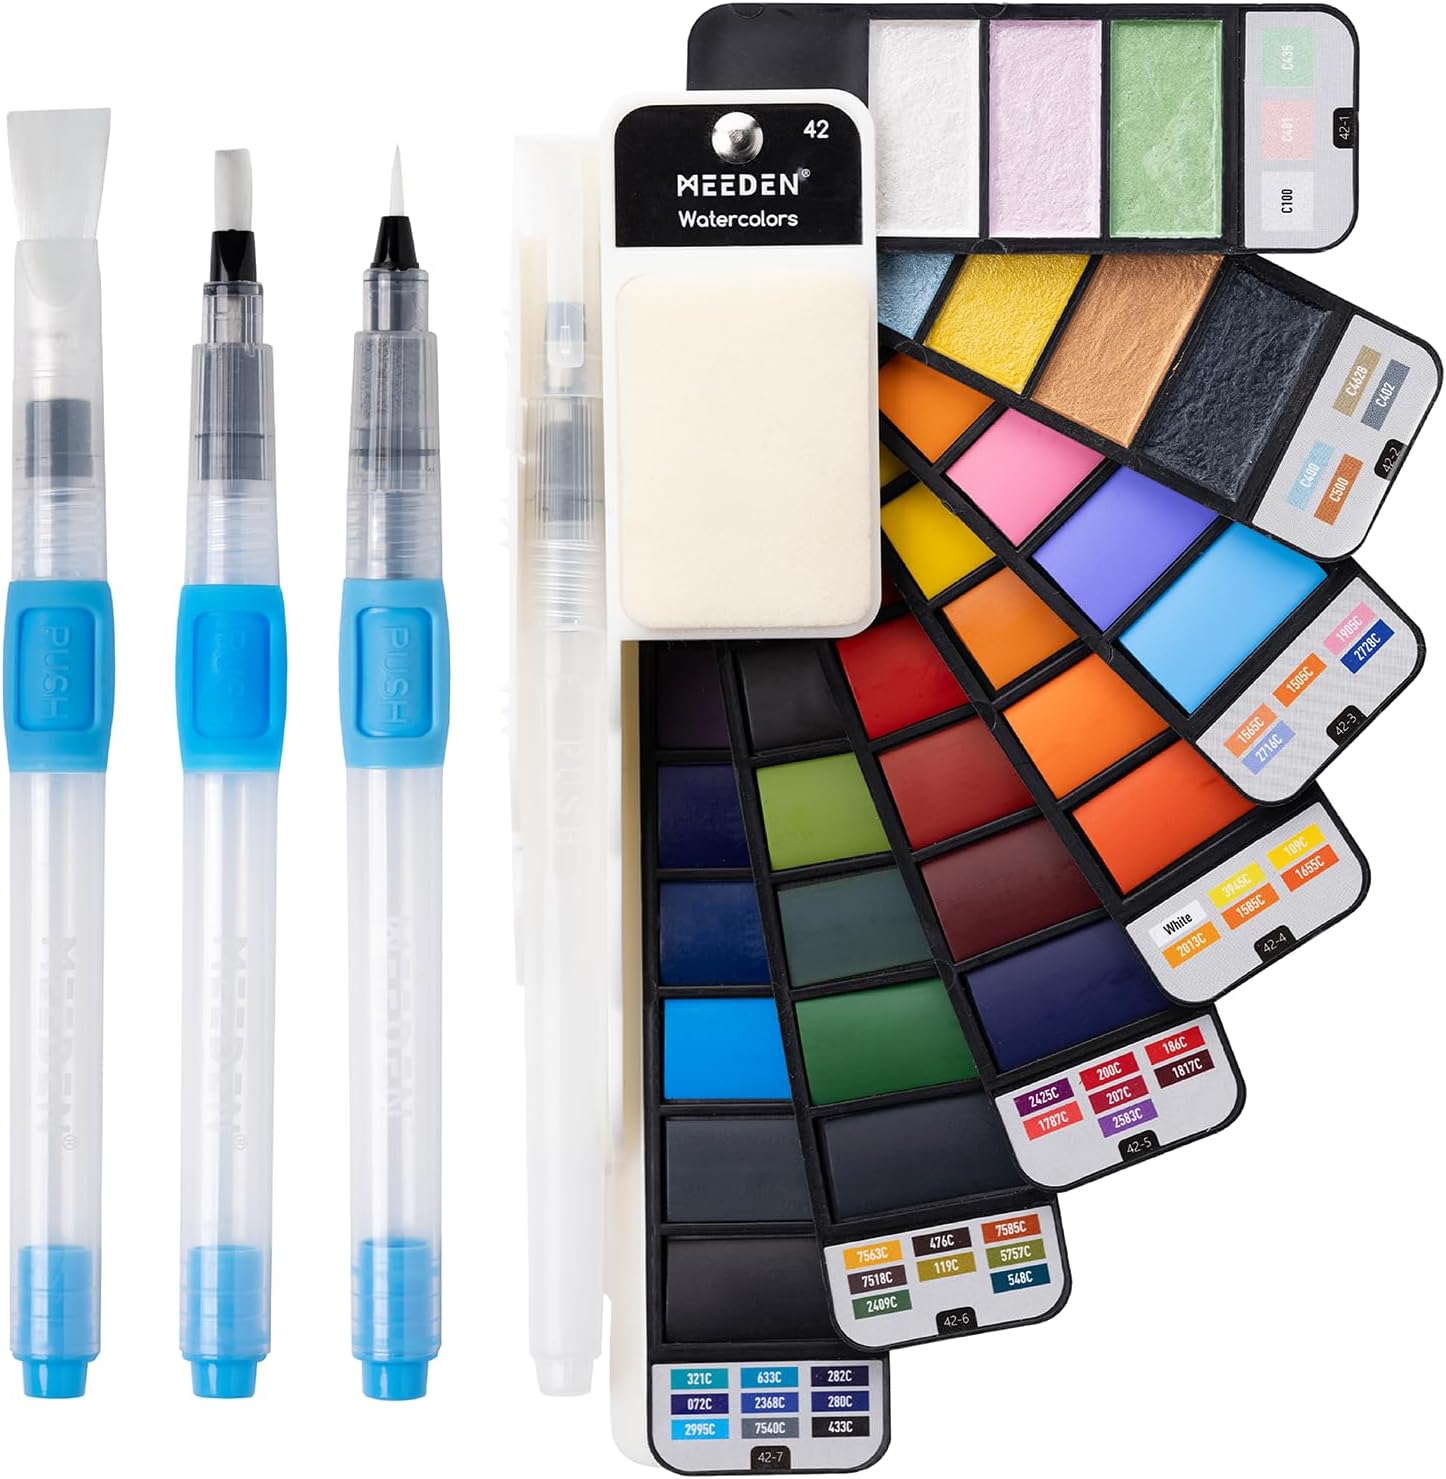 MEEDEN Travel Watercolor Paint Set, 42 Assorted Colors with 4 Brushes